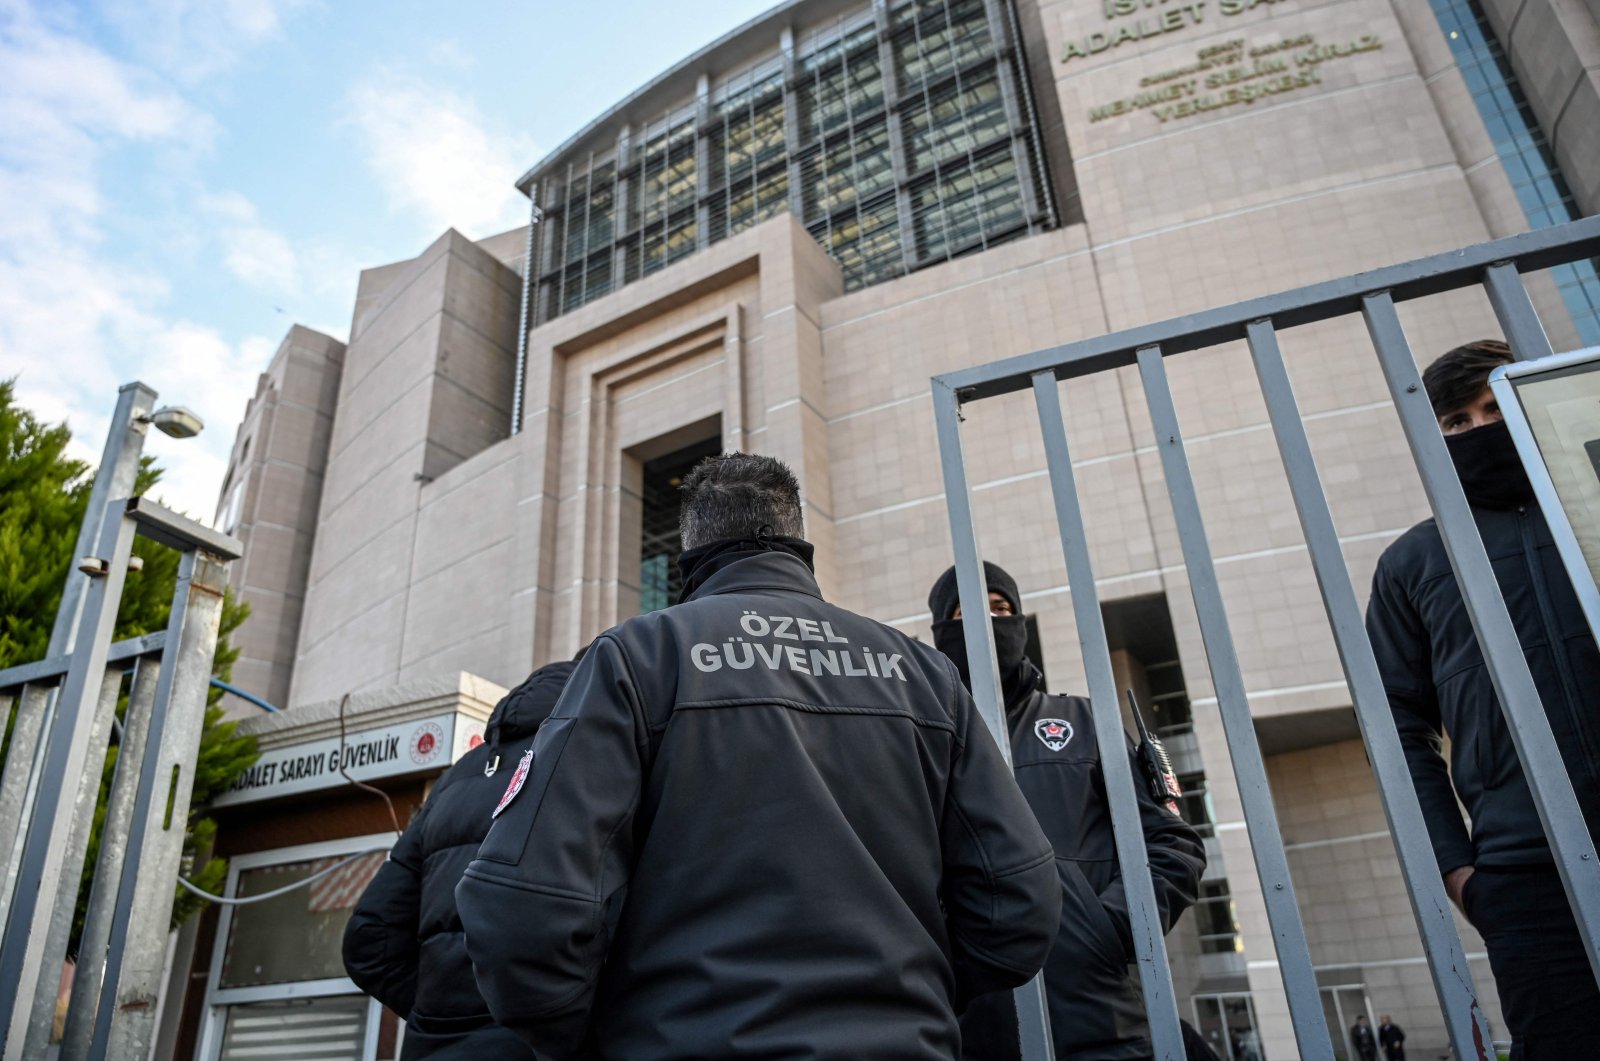 Security personnel man an entrance of an Istanbul courthouse as the trial of jailed civil society leader Osman Kavala resumes with the first hearing since President Erdoğan threatened to expel 10 Western ambassadors who called for his release, Nov. 26, 2021. (AFP File Photo)